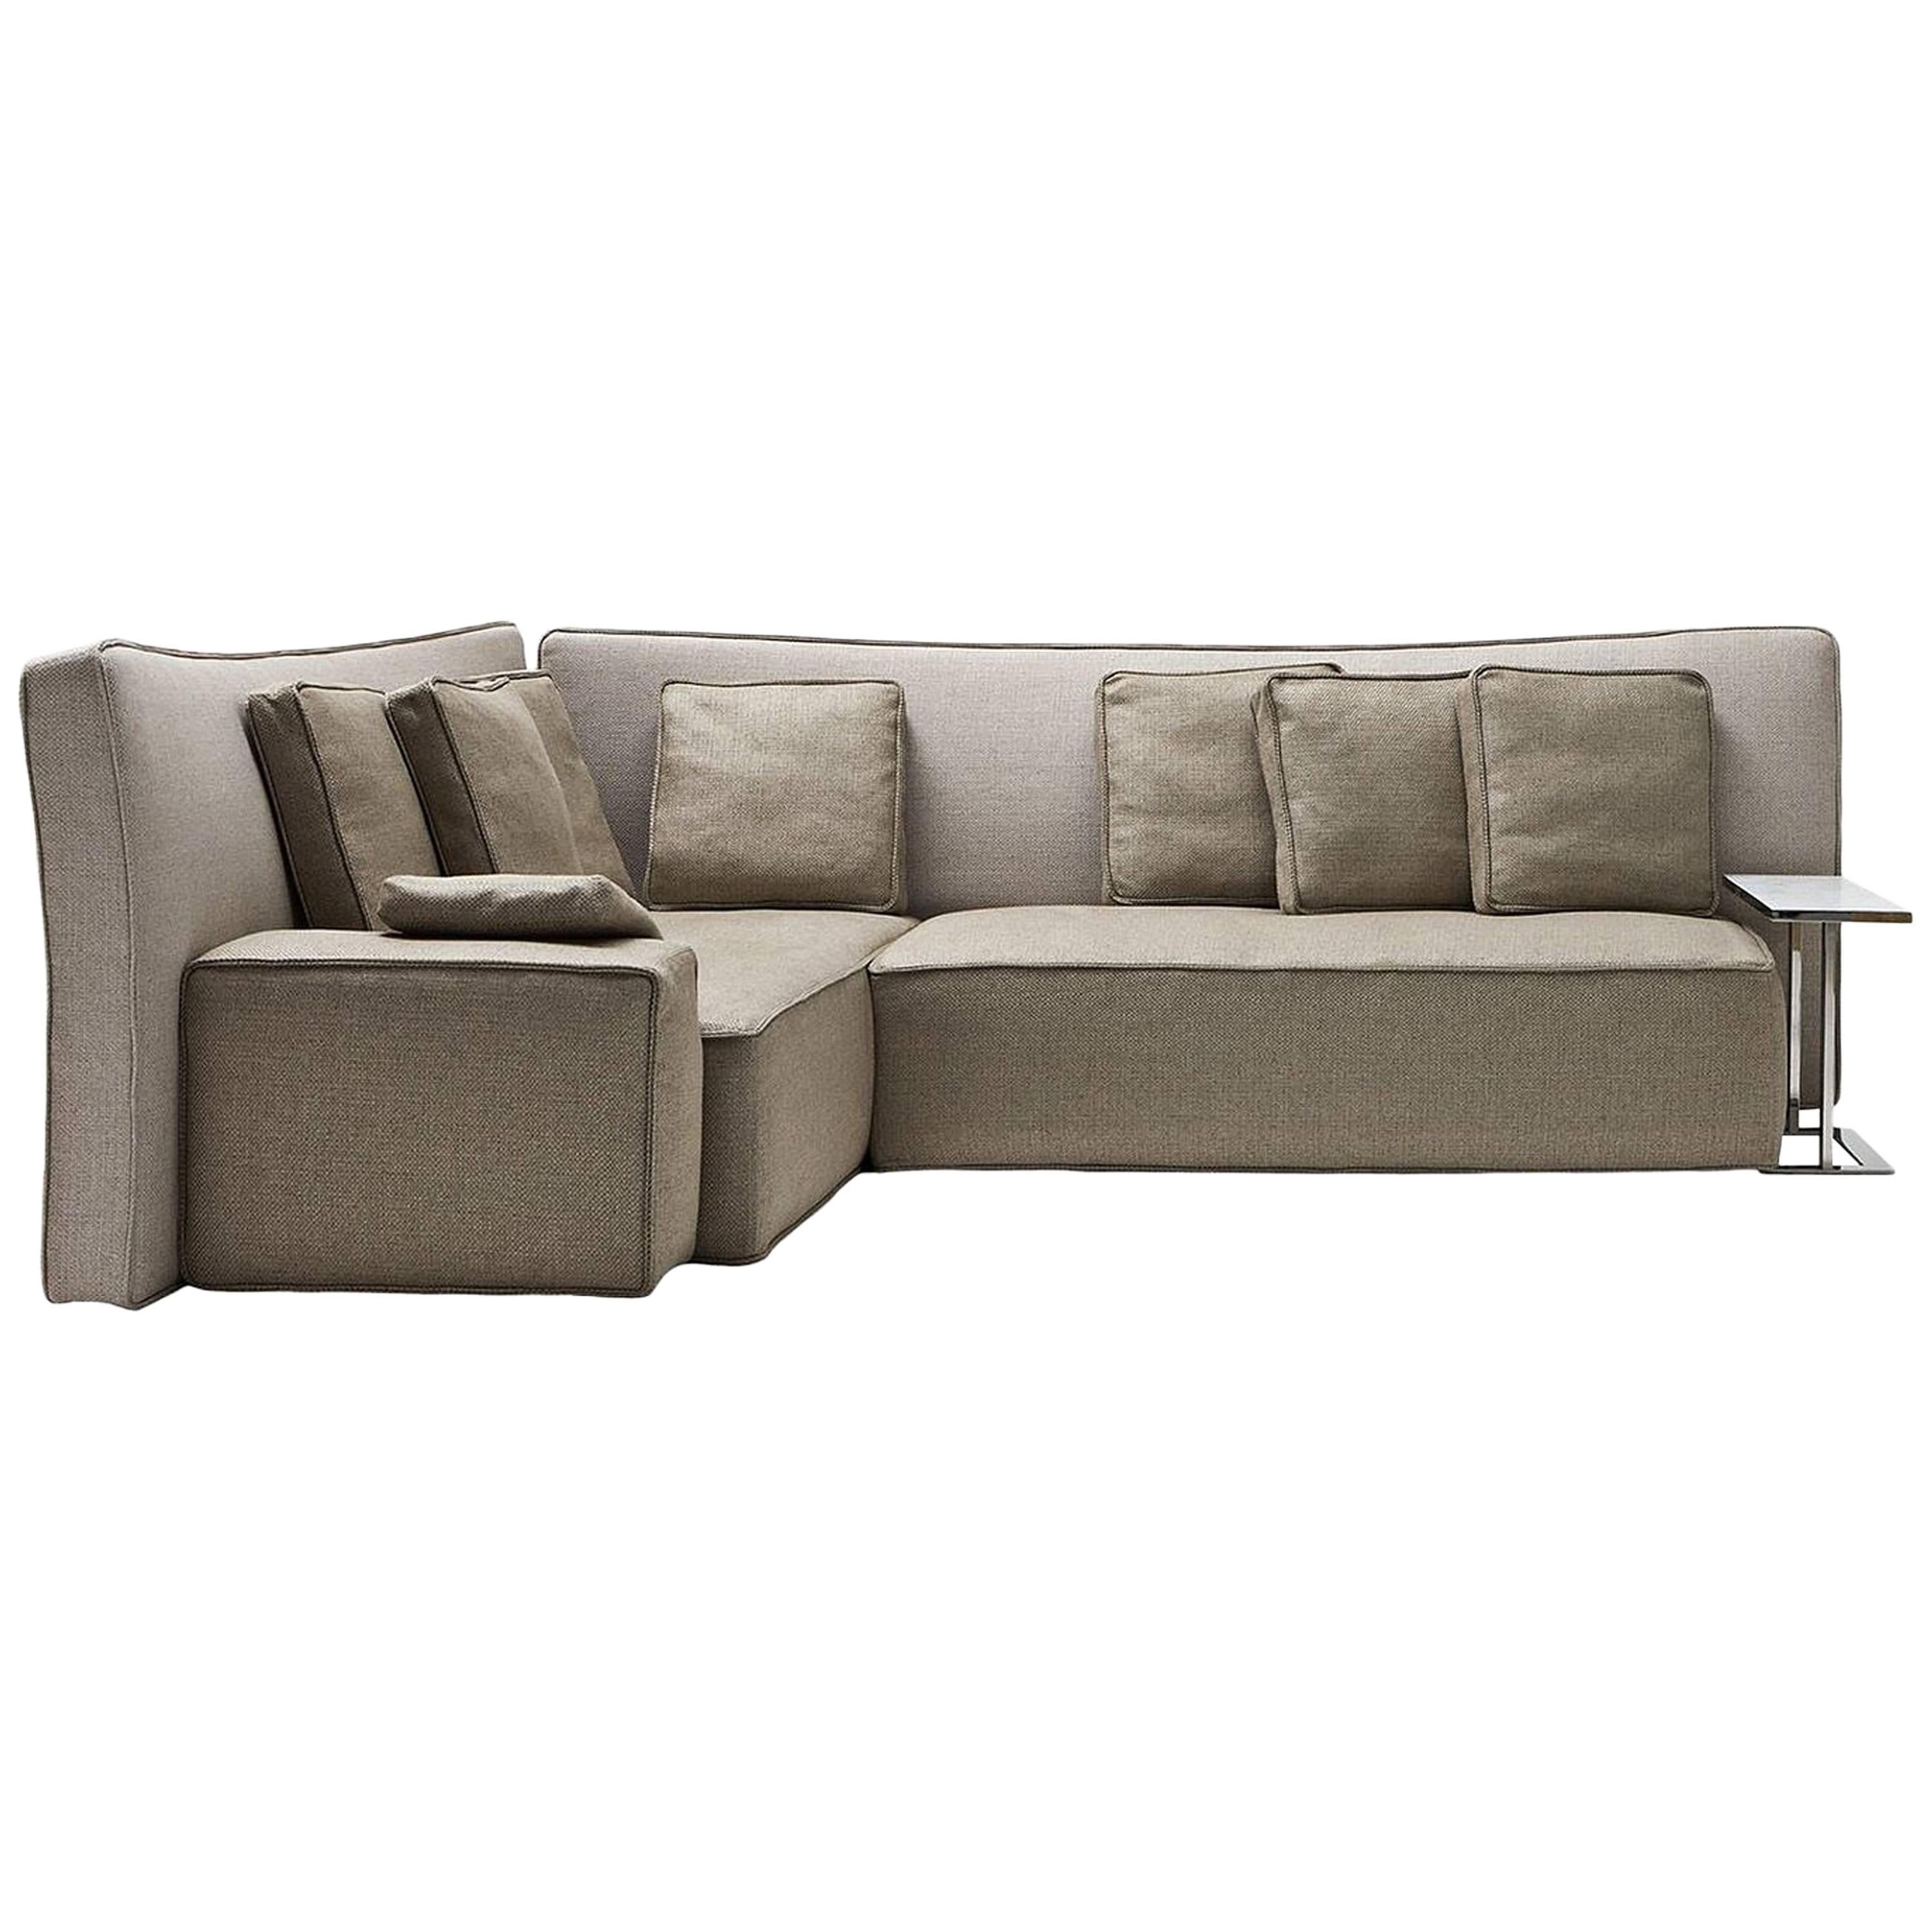 "Wow" Composition C1 or C2 Sectional Sofa in Goose Feather by P. Starck, Driade For Sale